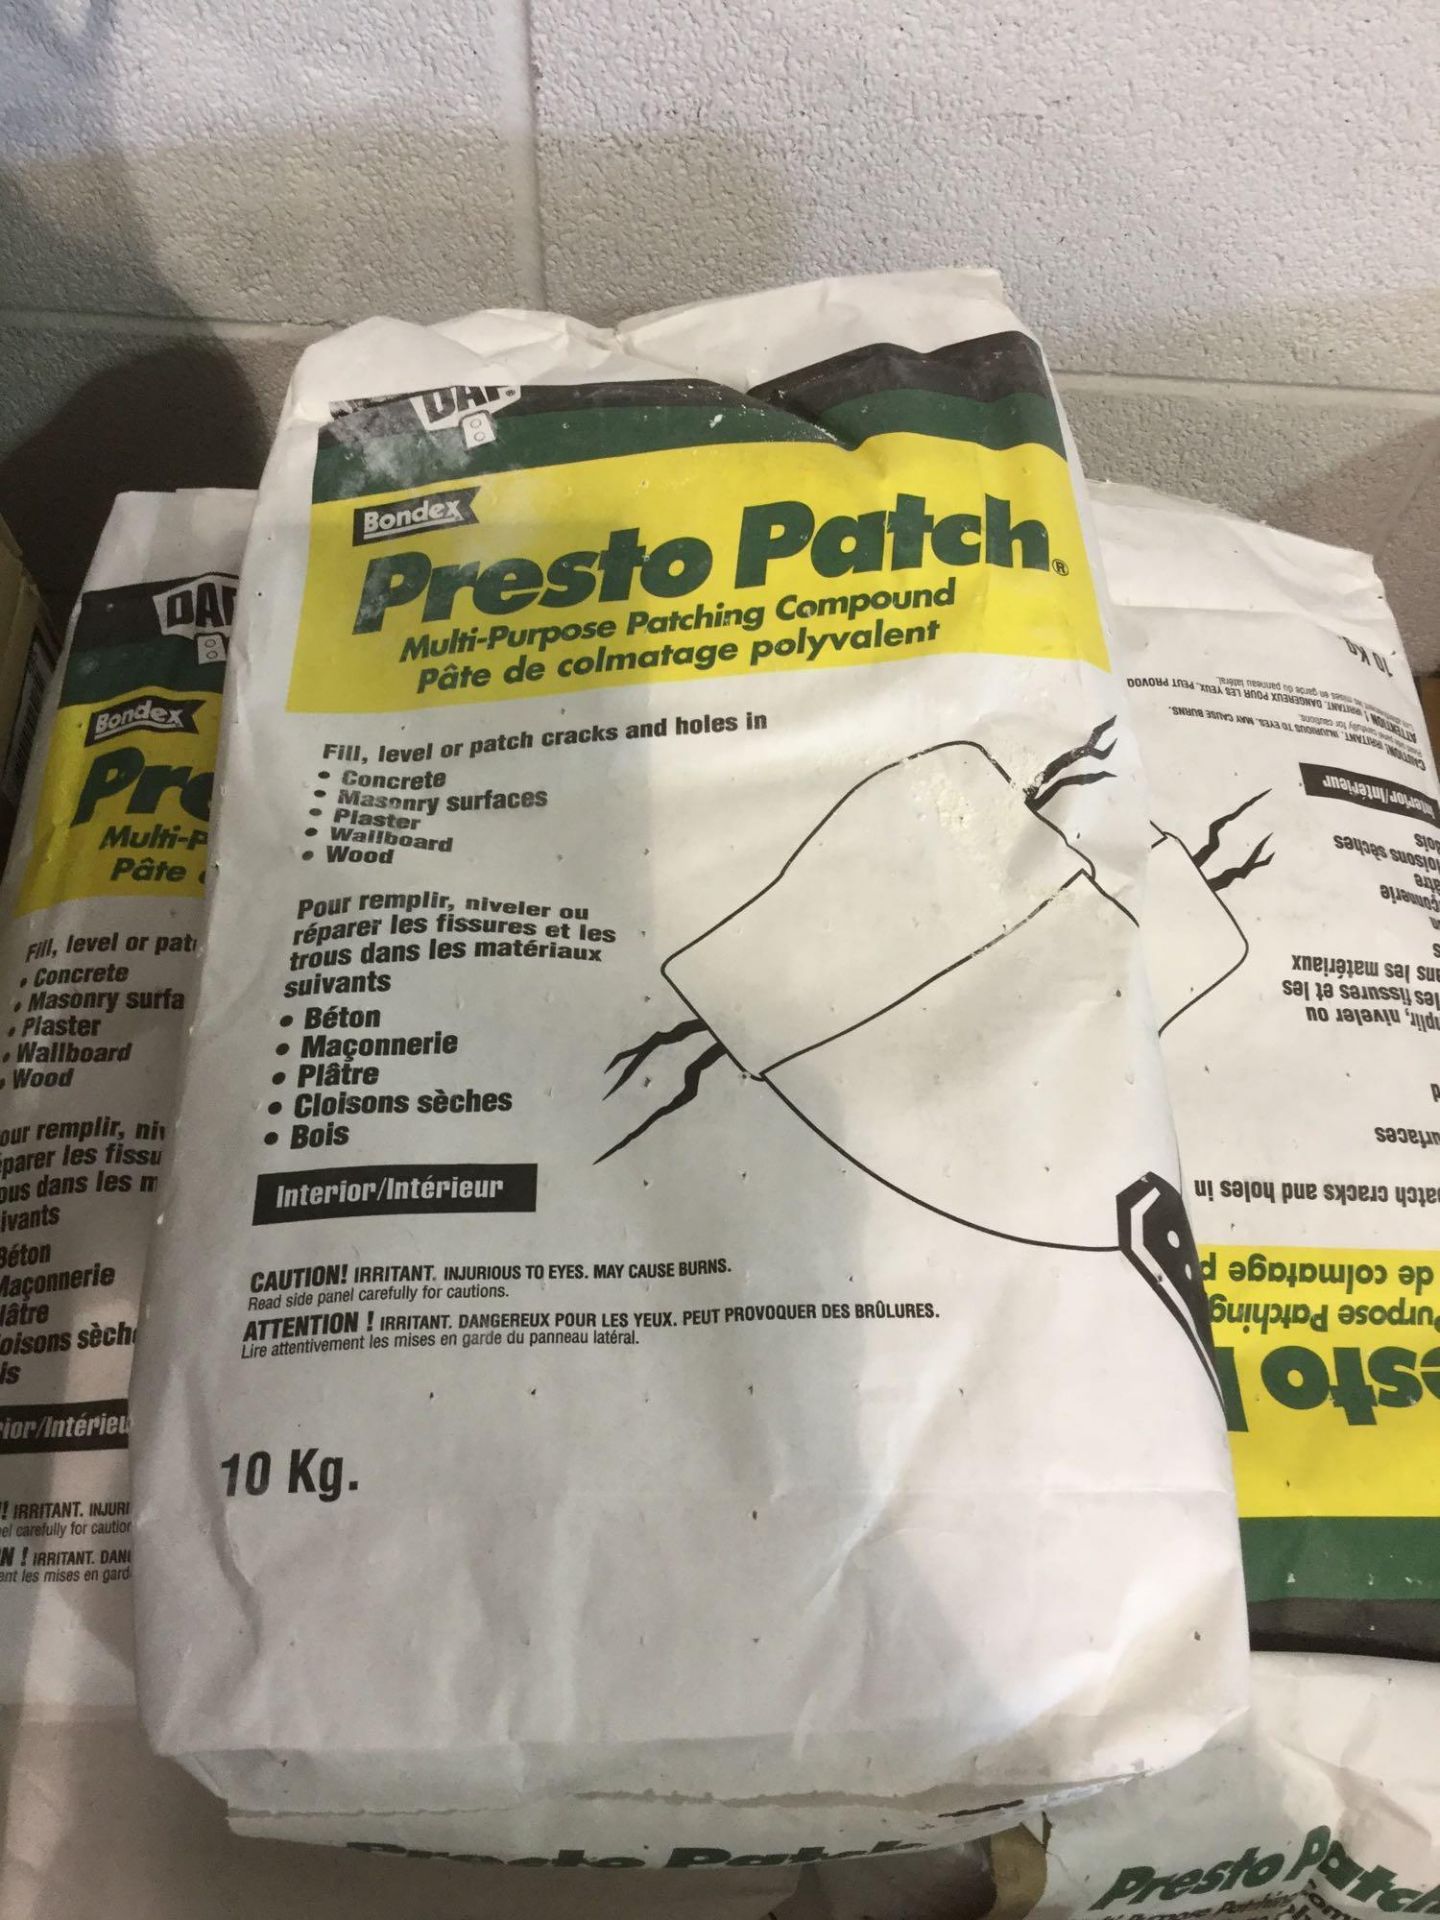 Bondex Persto Patch Multi-Purpose Patching Compound 10KG